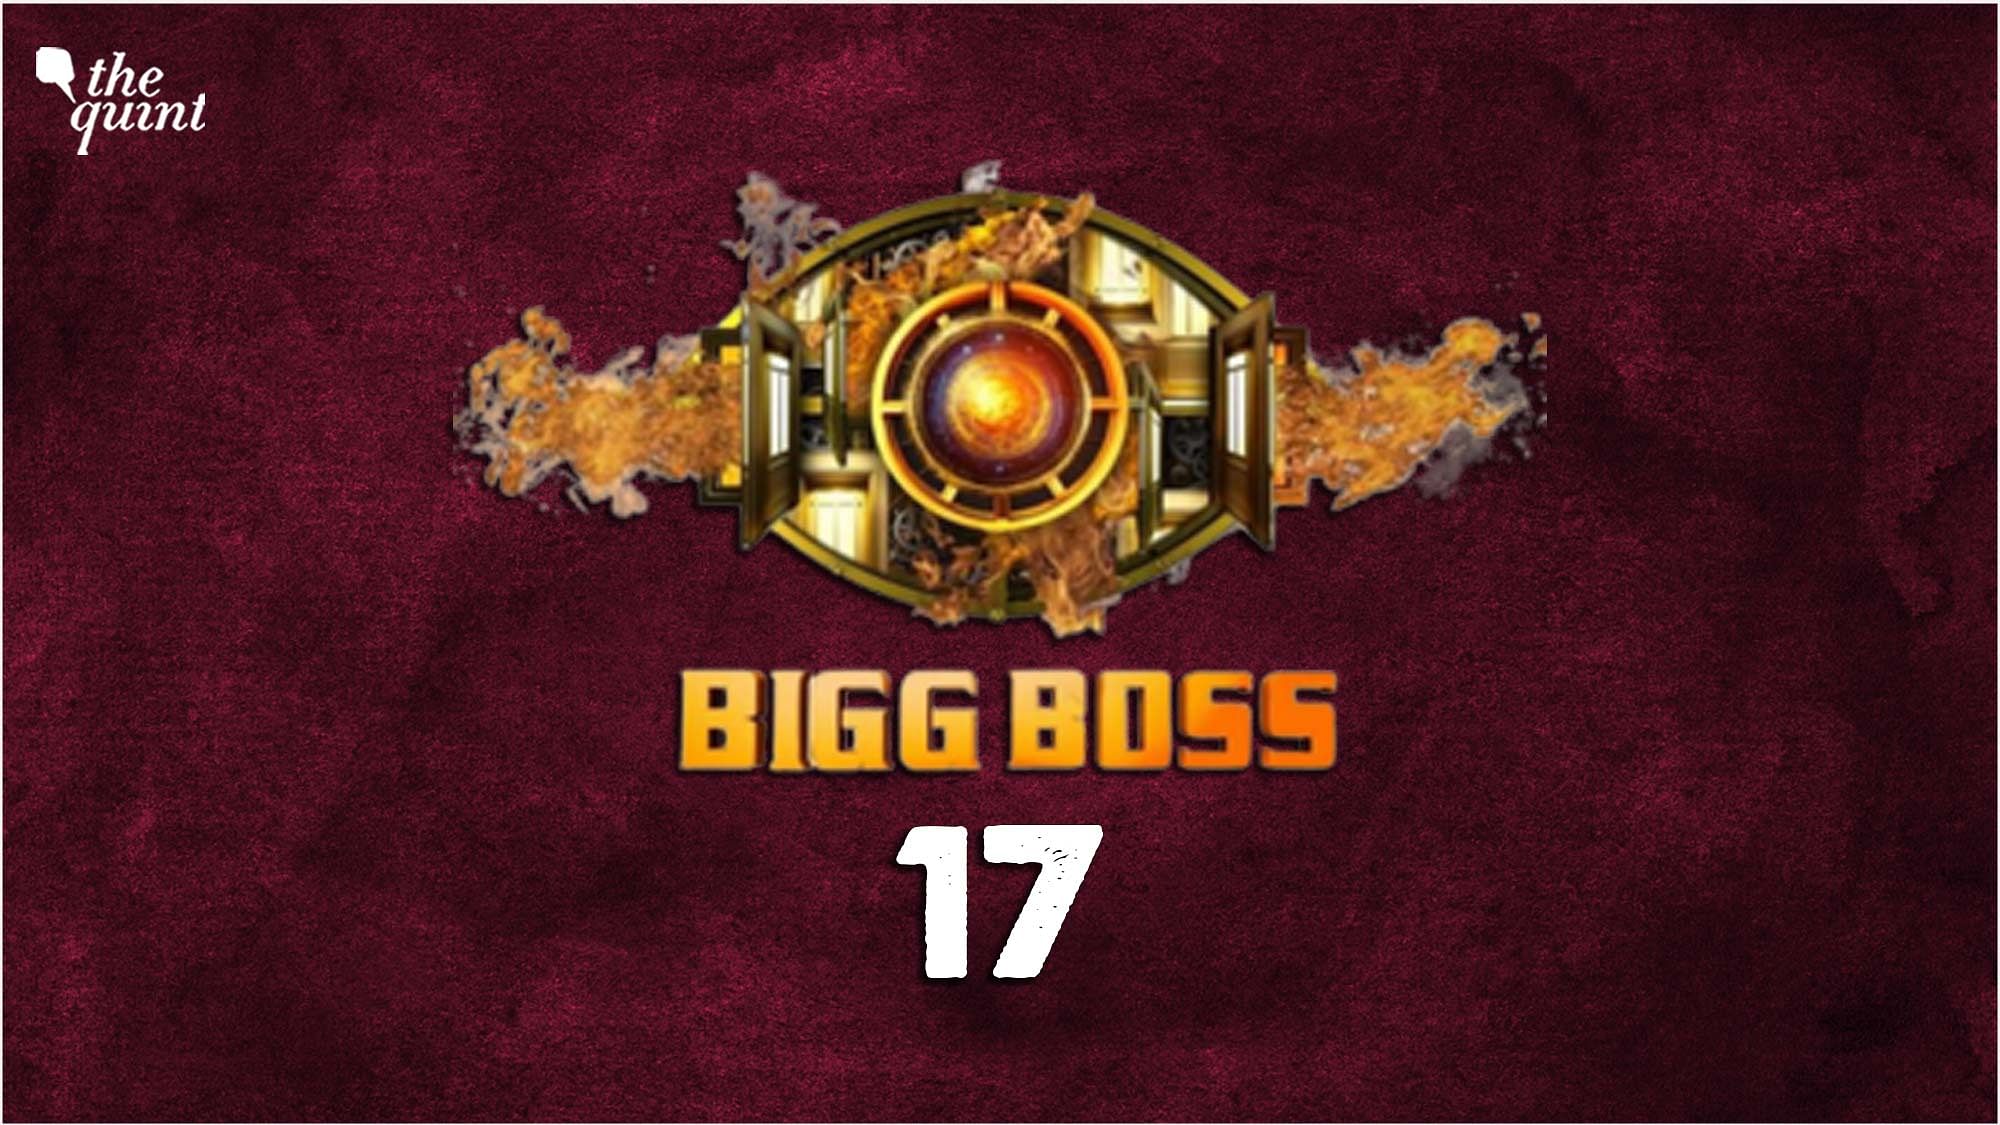 <div class="paragraphs"><p>Bigg Boss 17 Started From Today: Here is the list of confirmed contestants announced by Salman Khan in Grand Premiere.</p></div>